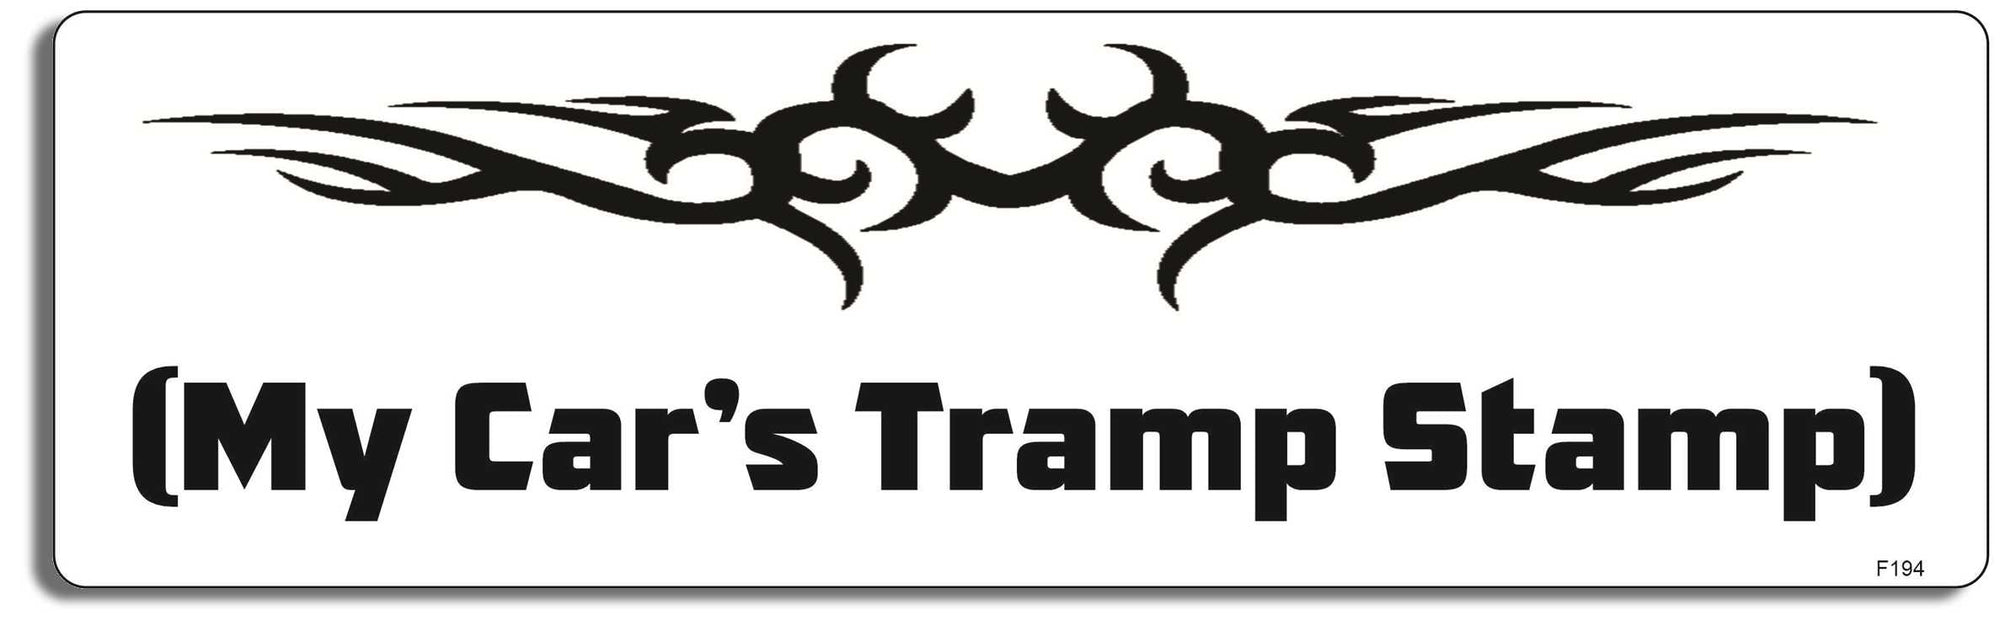 My Car's Tramp Stamp  -  3" x 10" -  Decal Bumper Sticker-funny Bumper Sticker Car Magnet My Car's Tramp Stamp-  Decal for cars funny quote, puns, sarcastic, tattoo